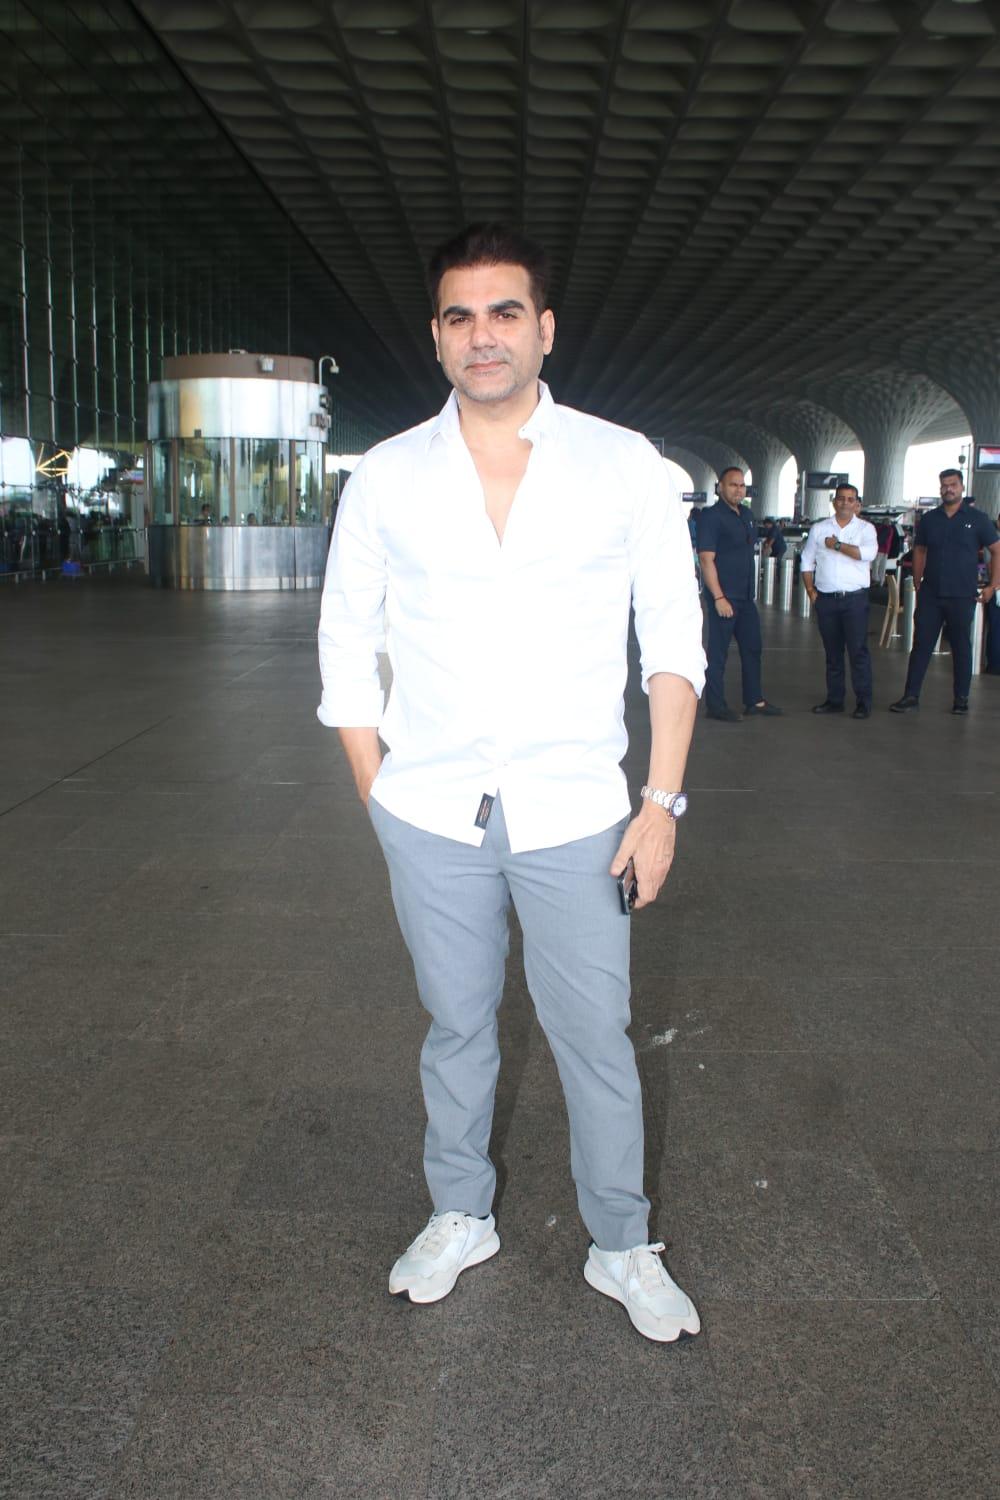 With the cameras clicking away, Arbaaz's airport sightings reflect his charismatic persona, leaving fans and onlookers captivated by his effortless charm